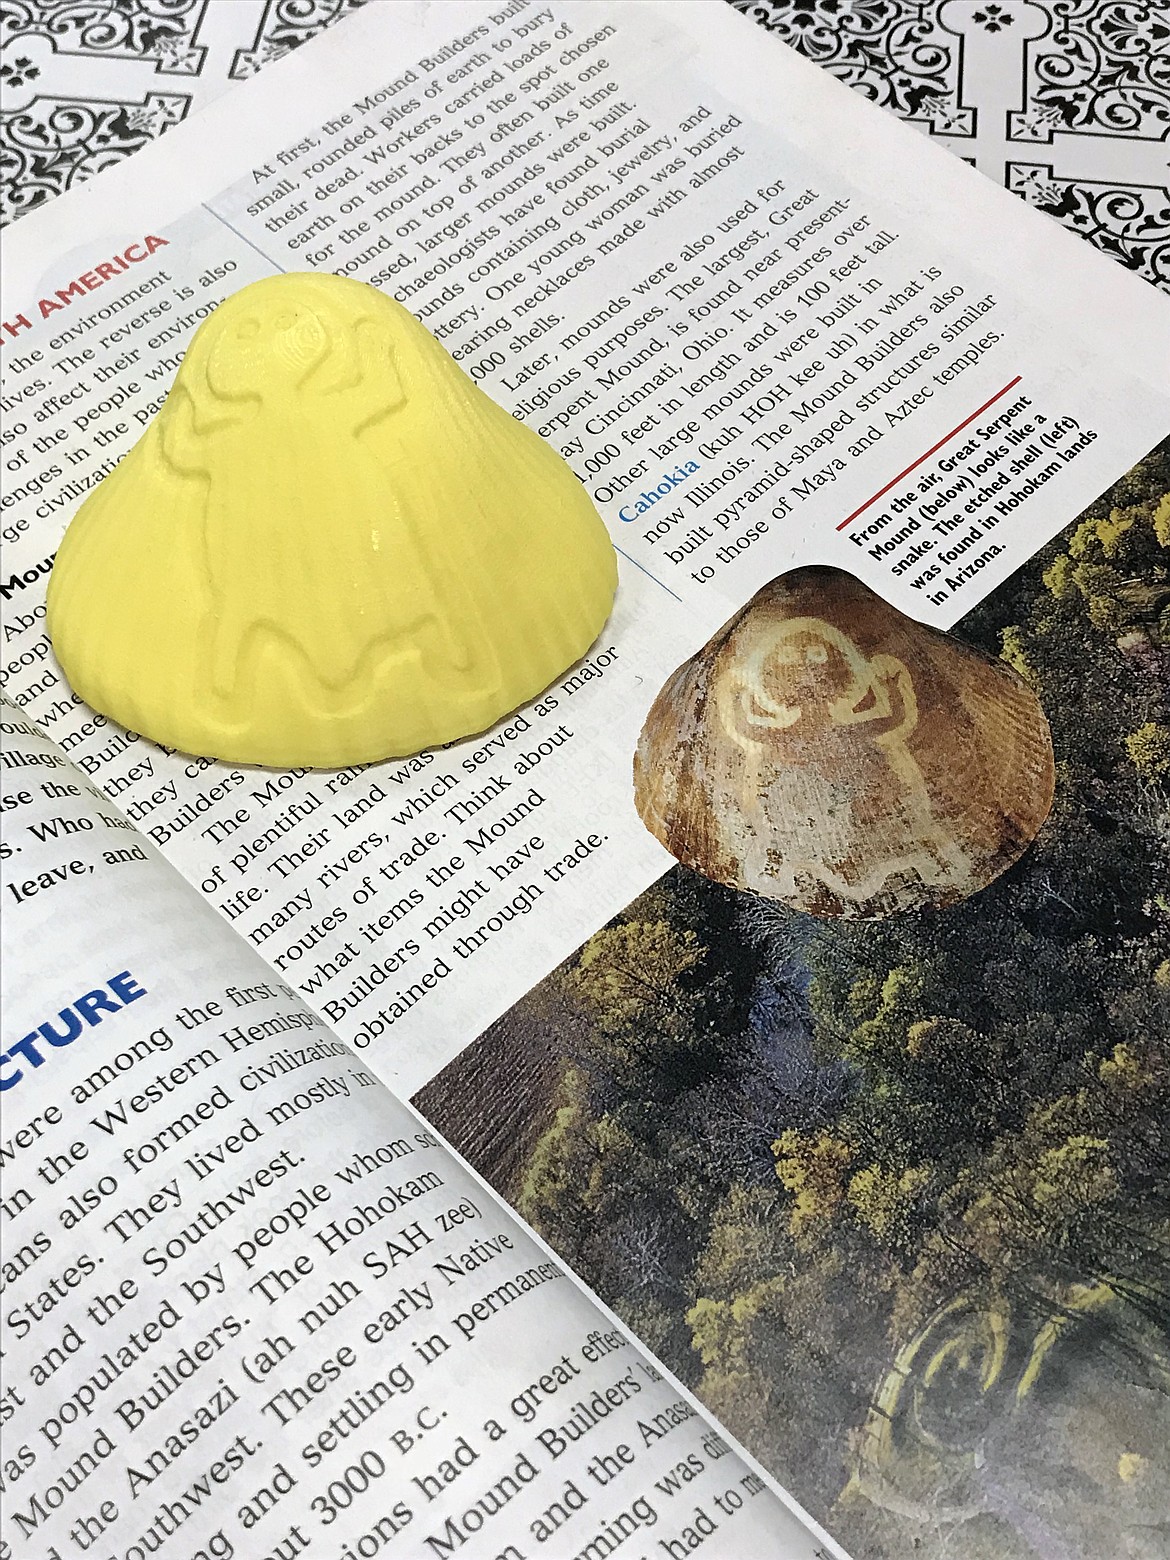 Students are able to handle ancient artifacts through modern-day 3-D printing technology. Using a photograph from their textbook, the class made a 3-D replica of an etched shell found on land where the Hohokam (prehistoric Indians) lived, which is now present-day Arizona.